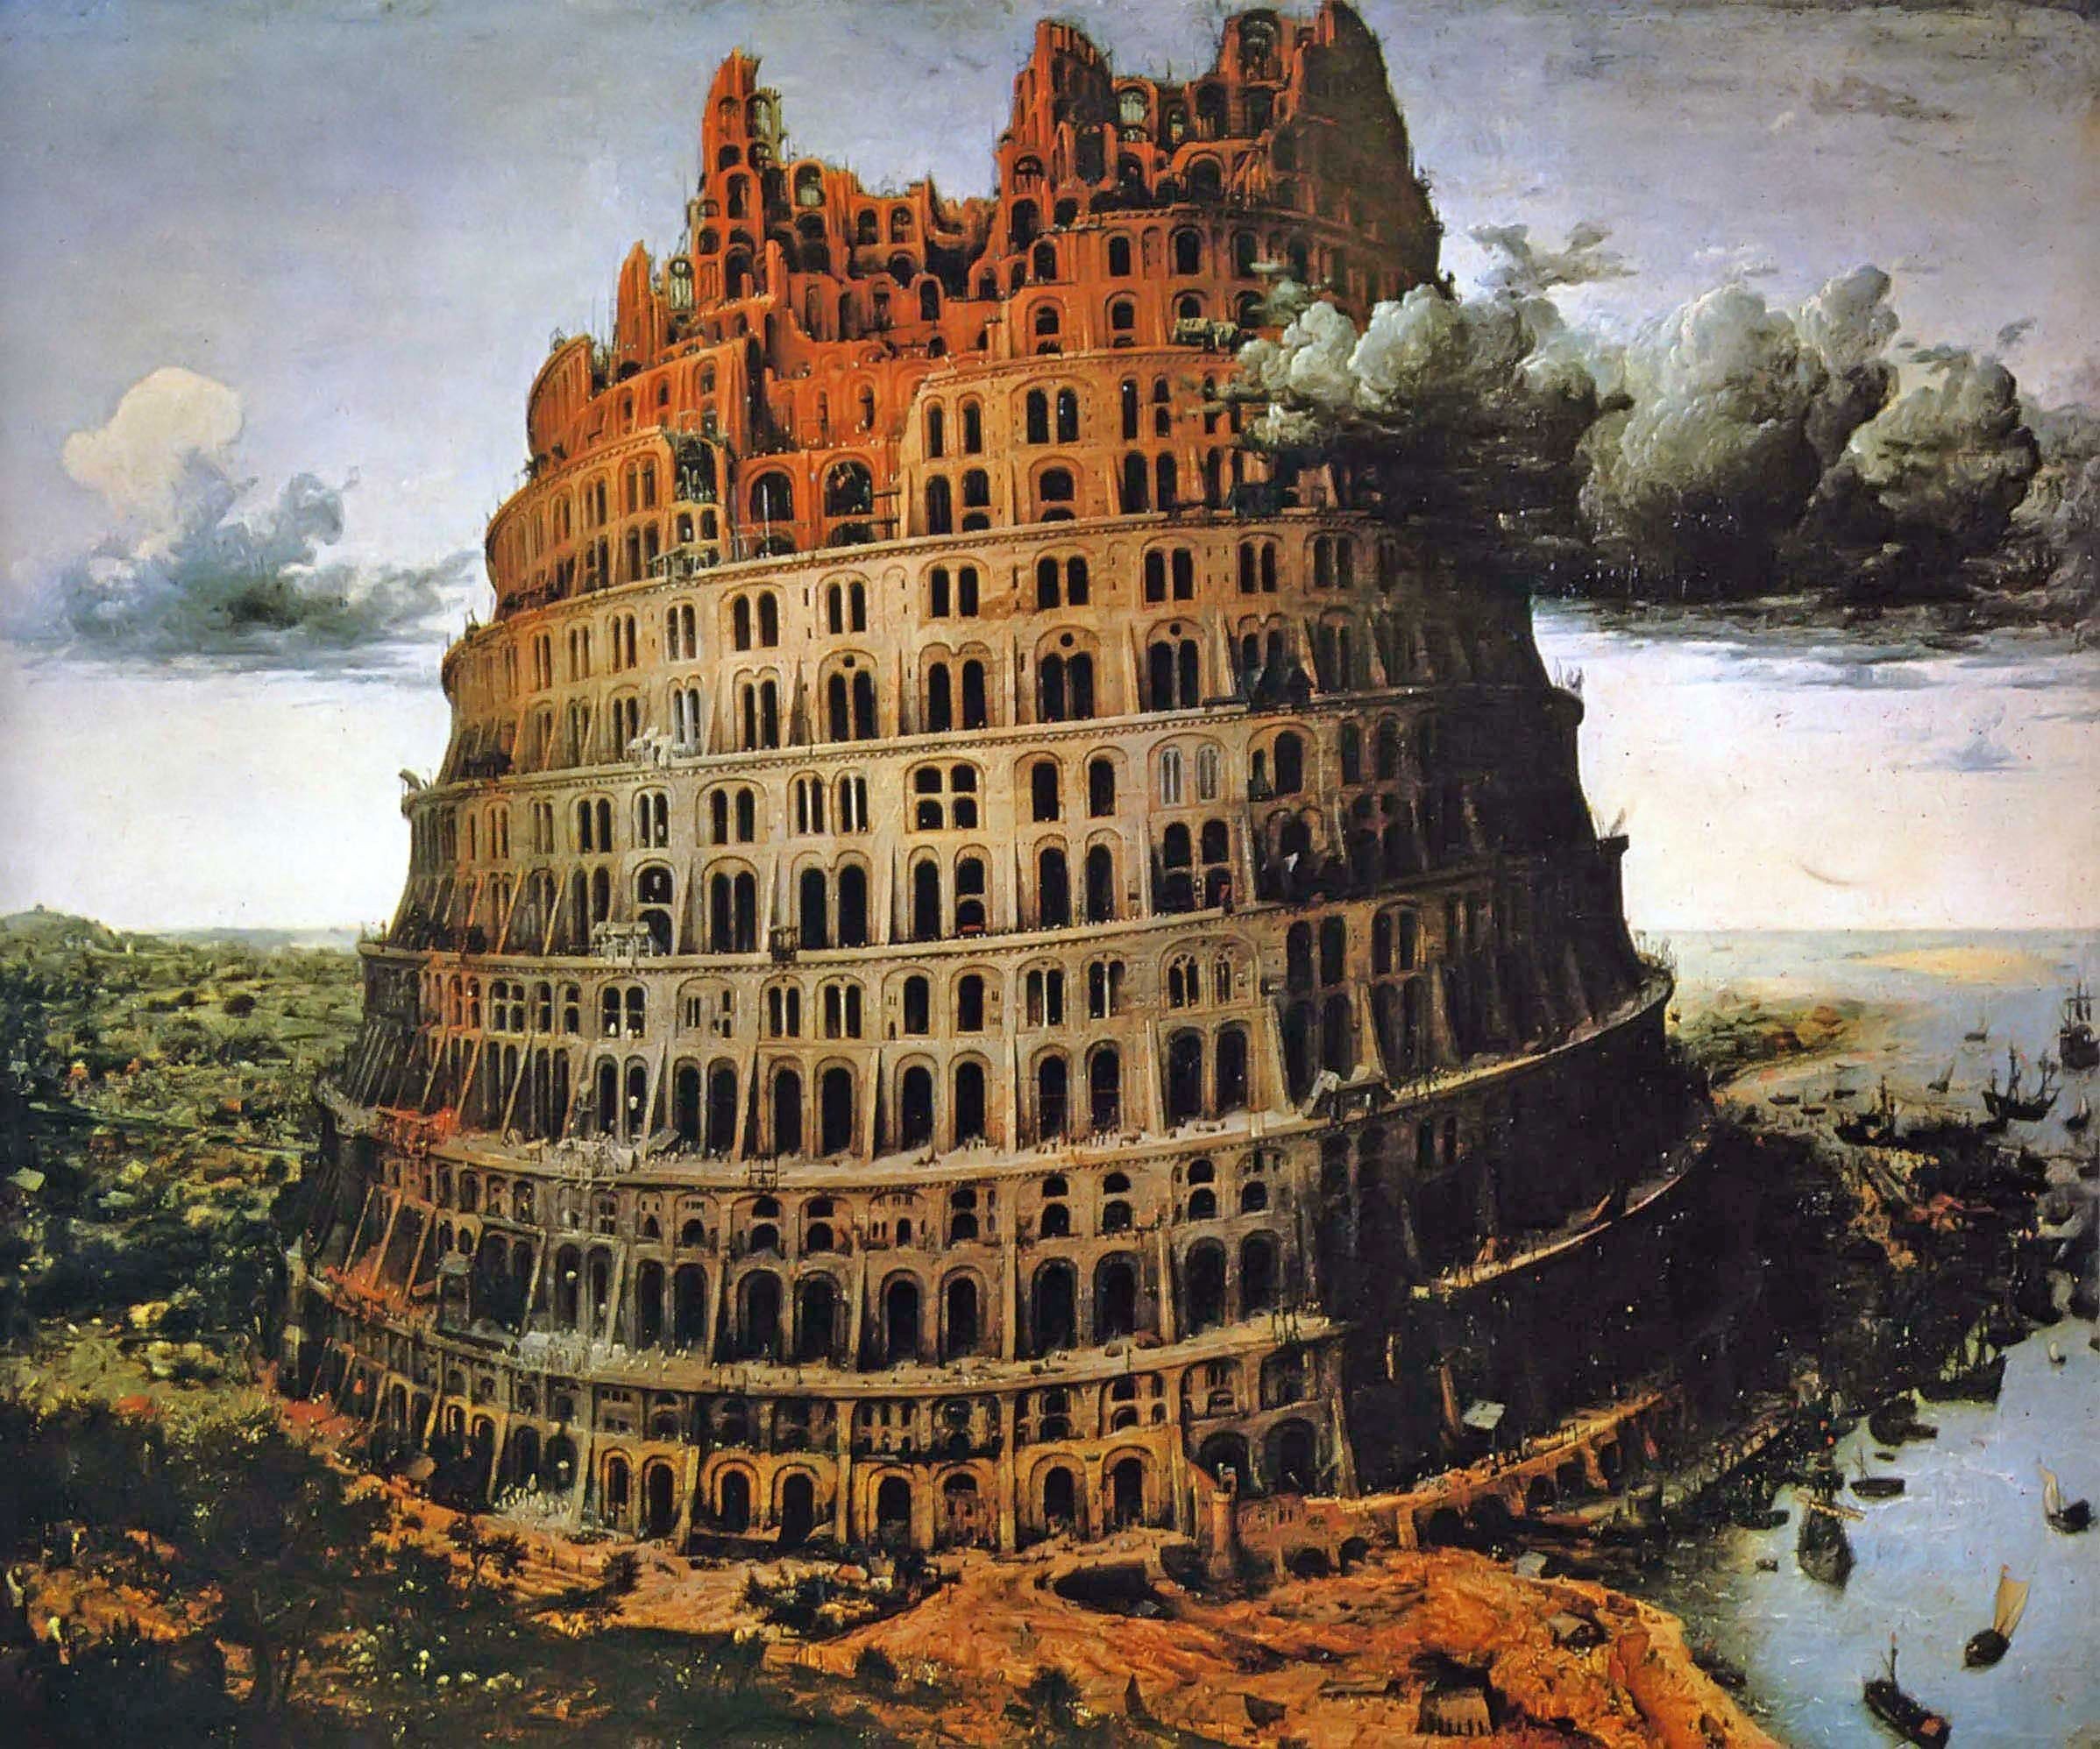 who built the tower of babel